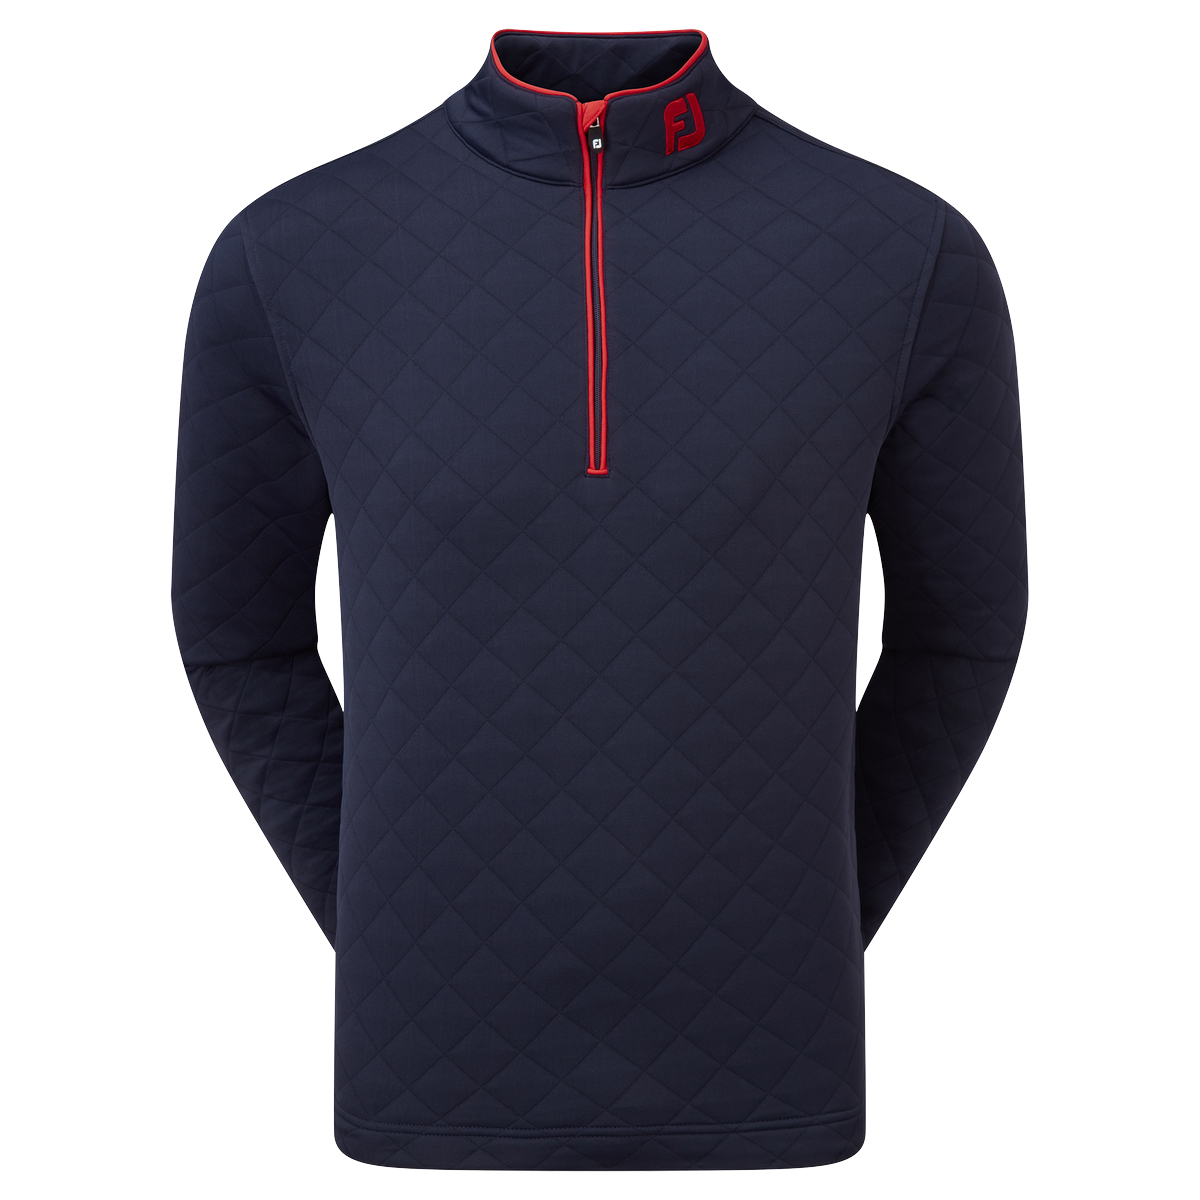 FootJoy Mens Diamond Jacquard Chill-Out Golf Mid-Layer Pullover  - Navy/Bright Red